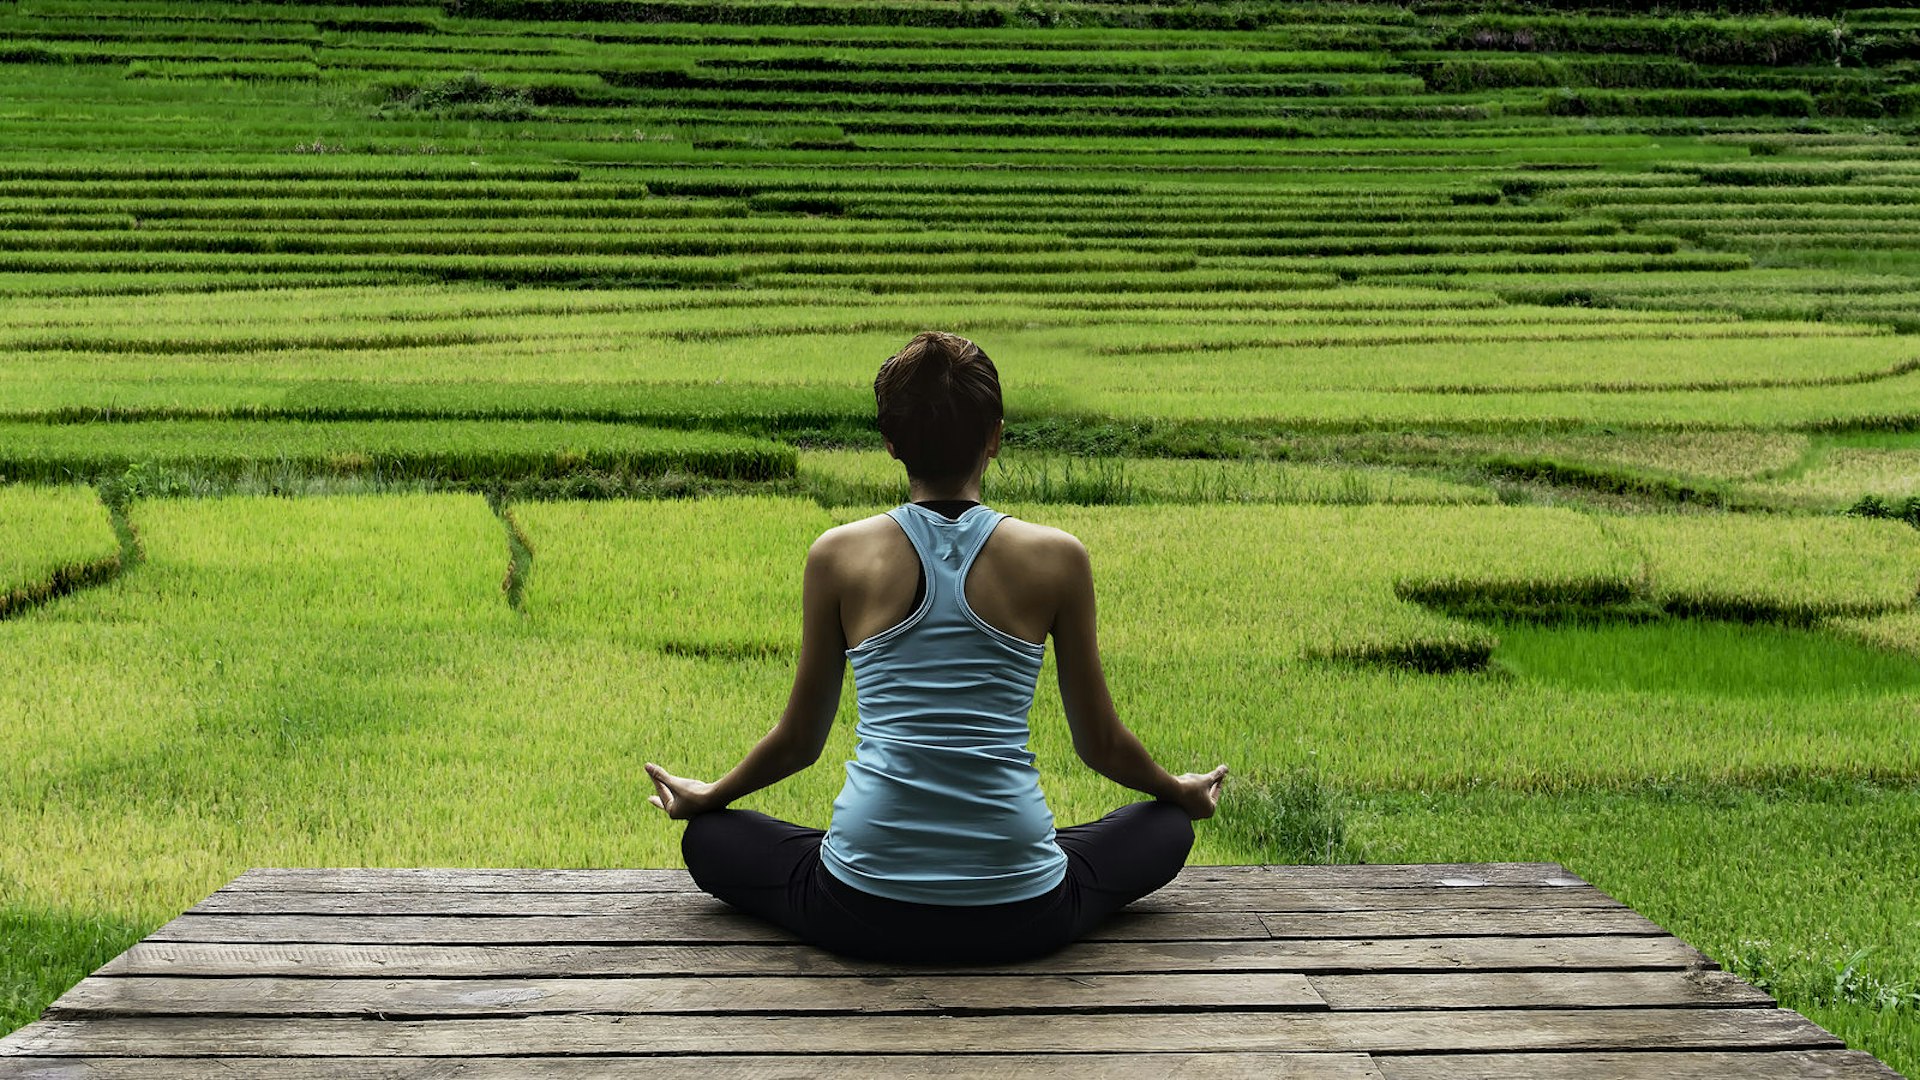 A woman, sitting on wooden decking, meditates while facing out towards rice fields in Bali